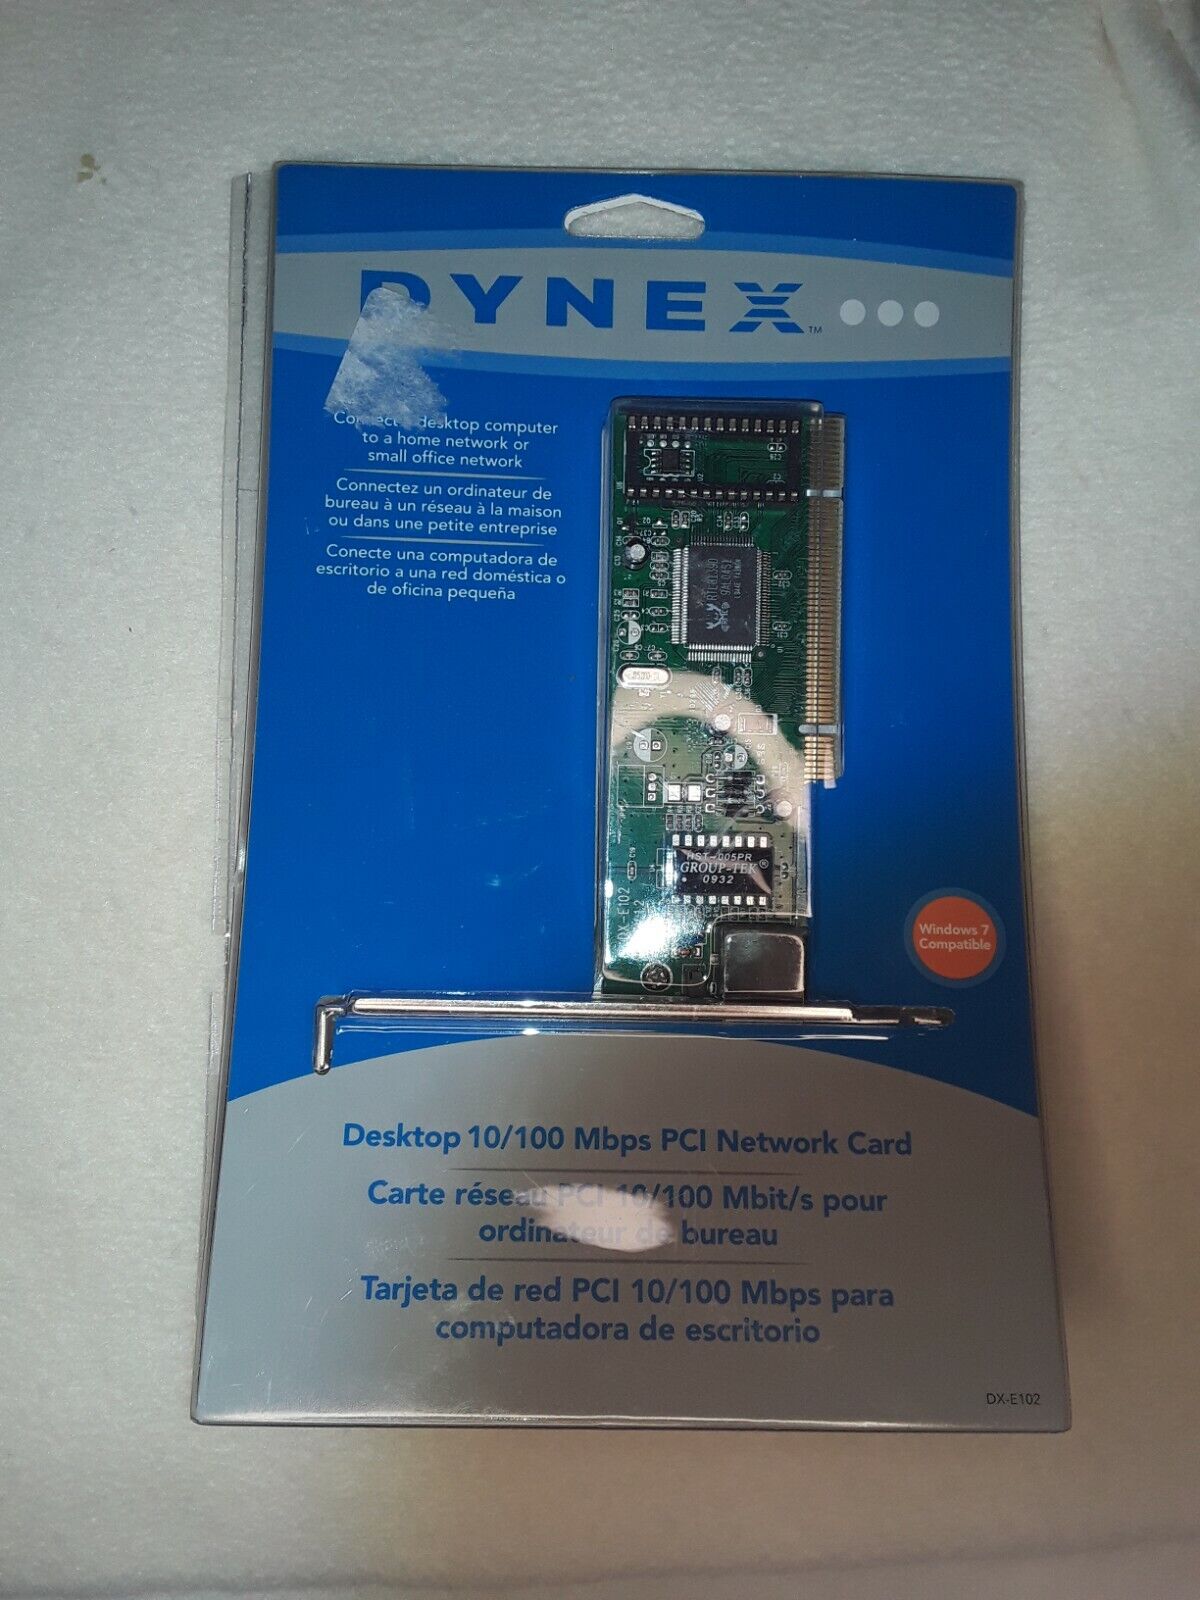 DYNEX BestBuy,  10/100 Mbps PCI network Card,  new in box,